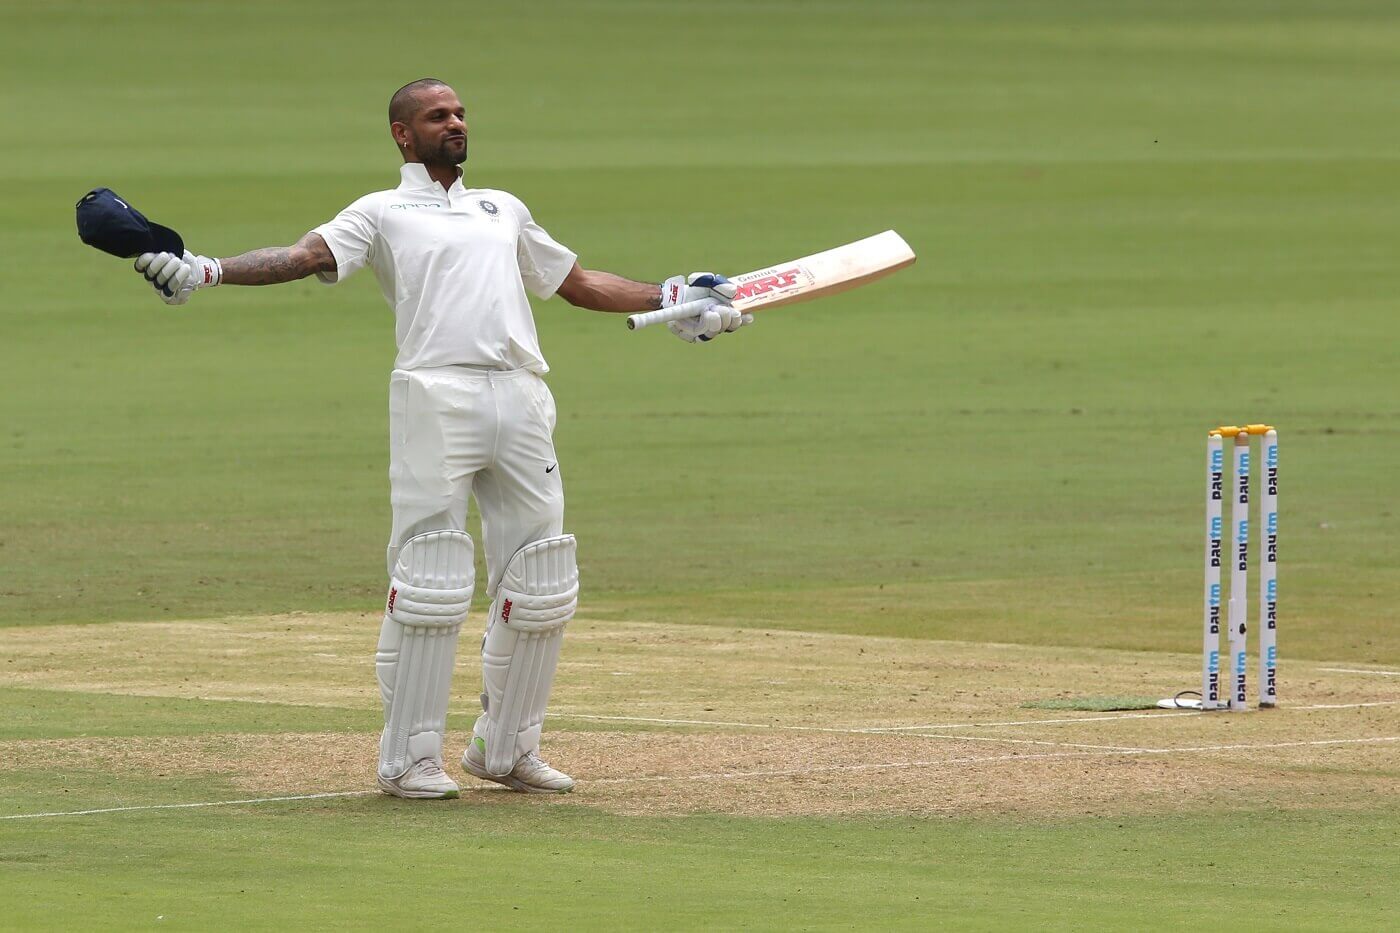 First Indian, Cricket, first day, Shikhar Dhawan, Sports